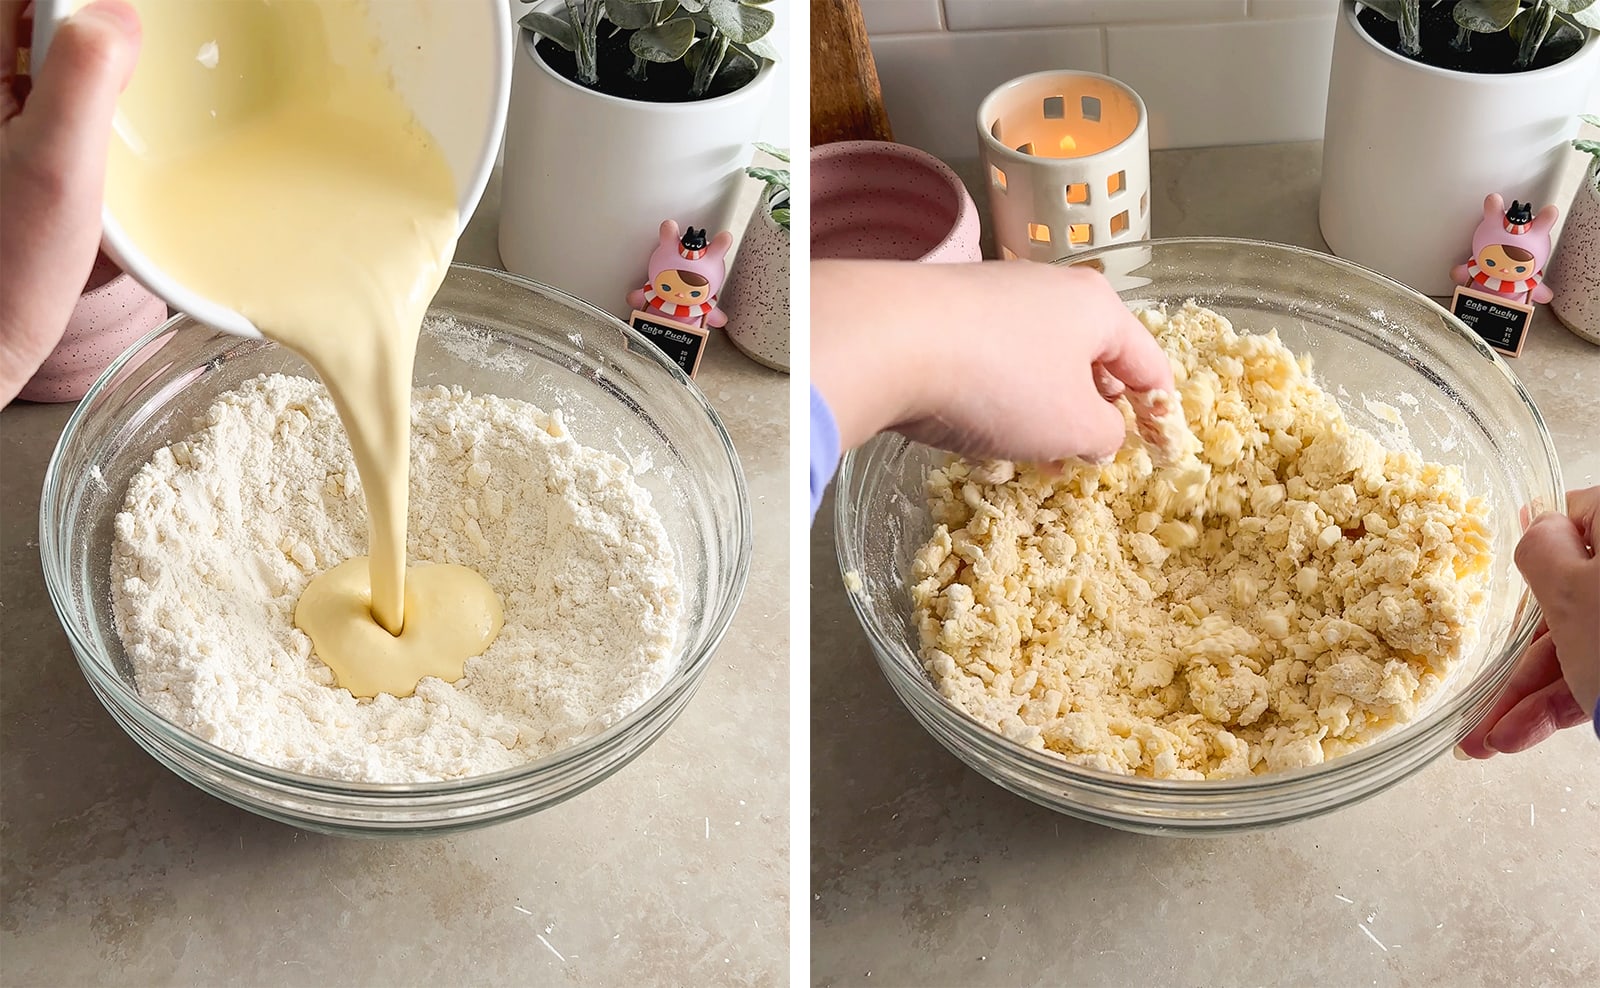 Left to right: pouring wet mixture into dry mixture, mixing scone dough in a bowl.